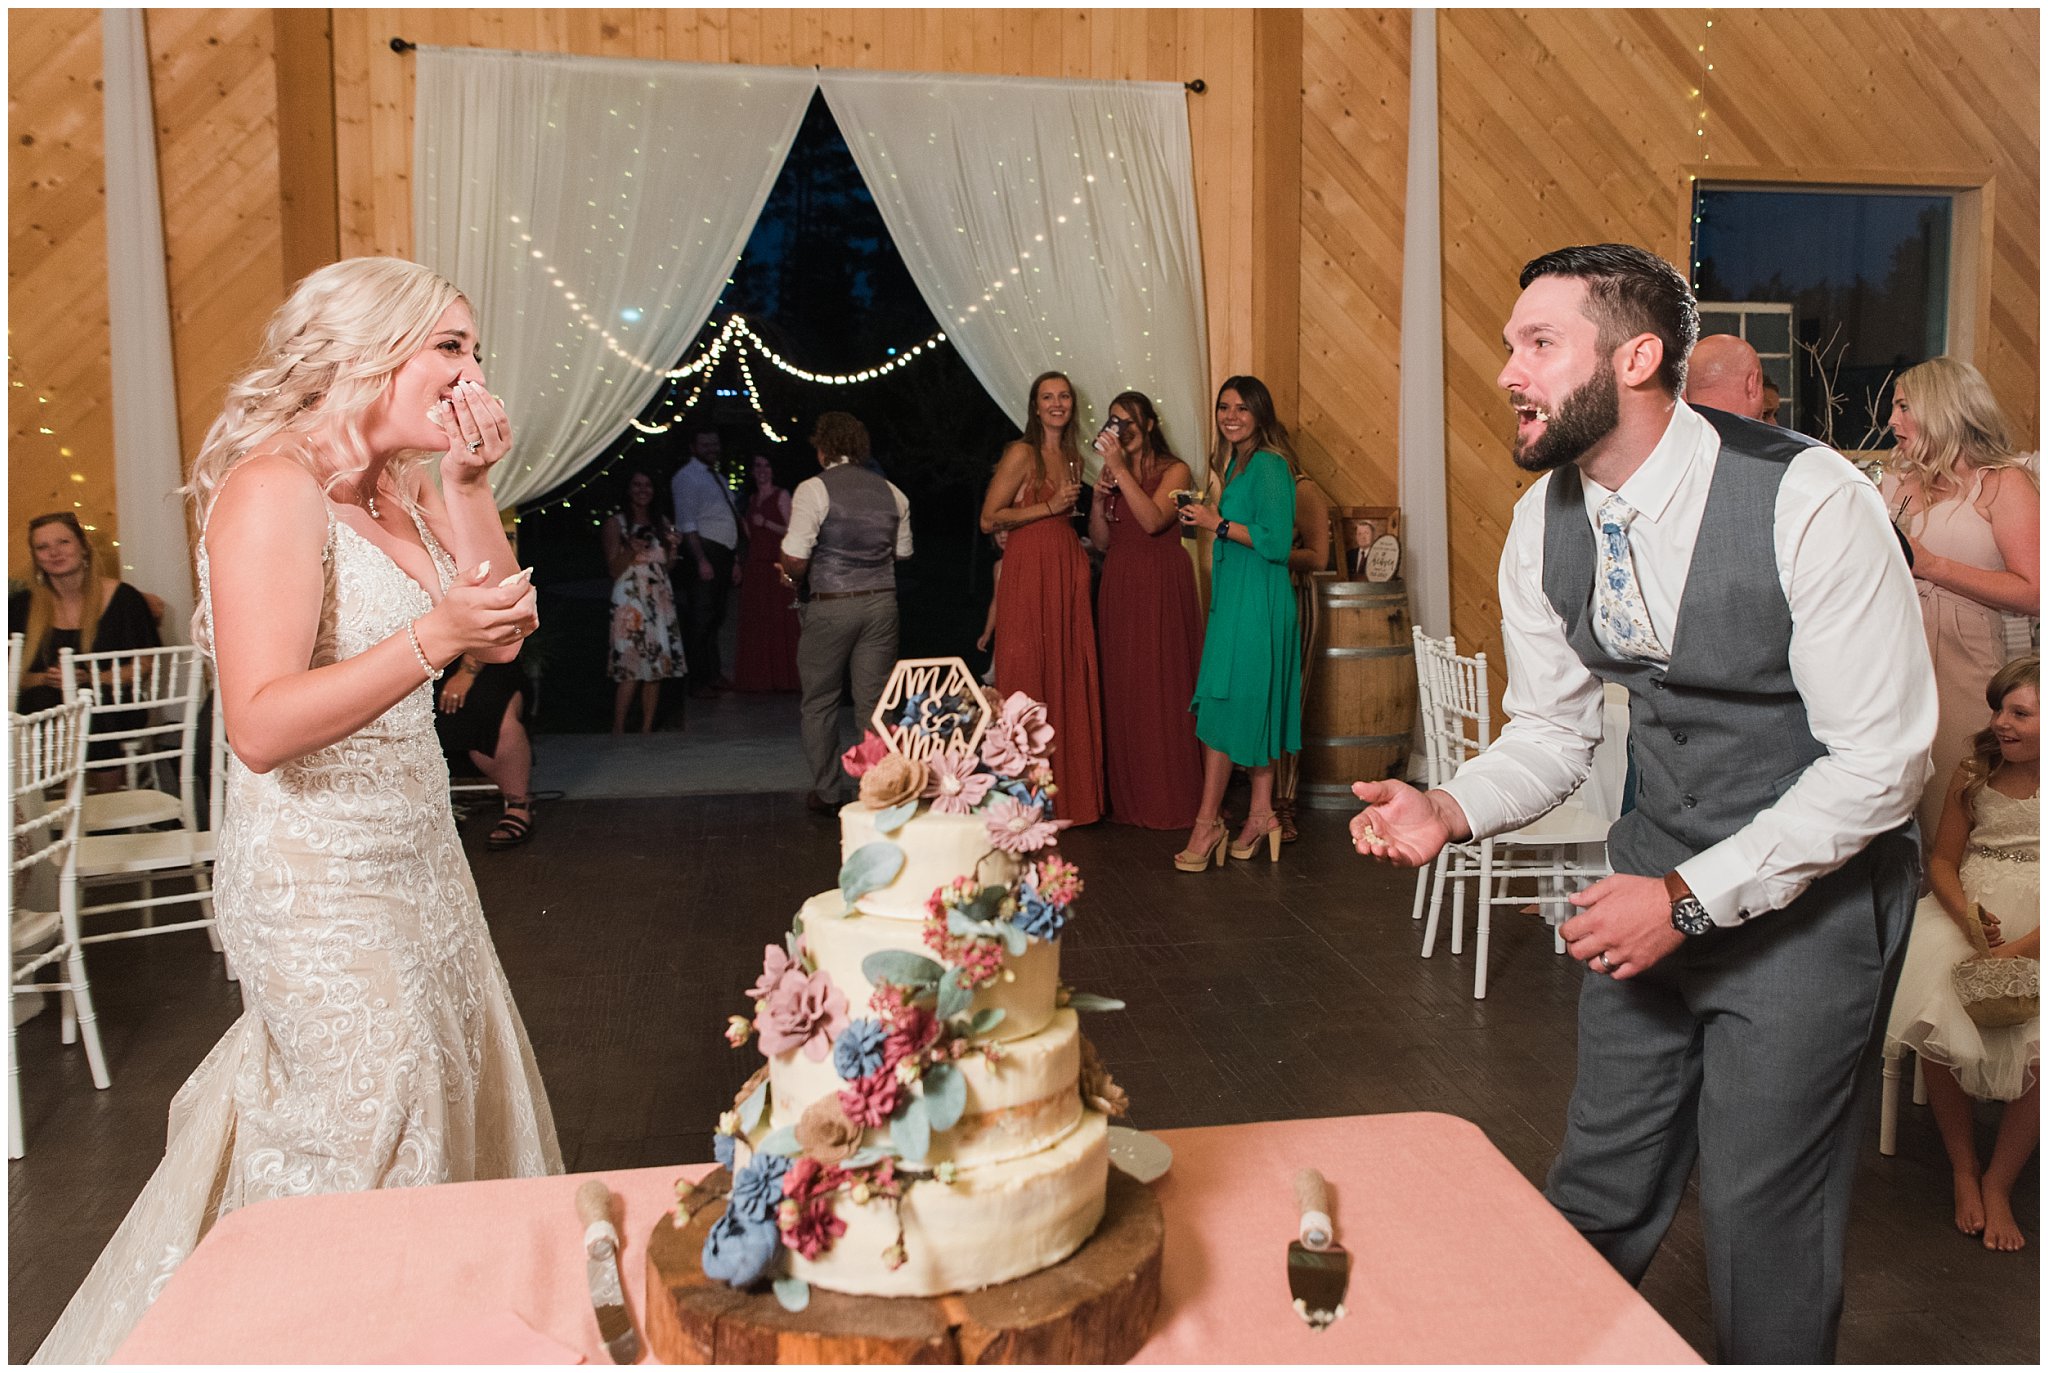 Bride and groom cake cutting and smash | Dusty Blue and Rose Summer Wedding at Oak Hills Utah | Jessie and Dallin Photography